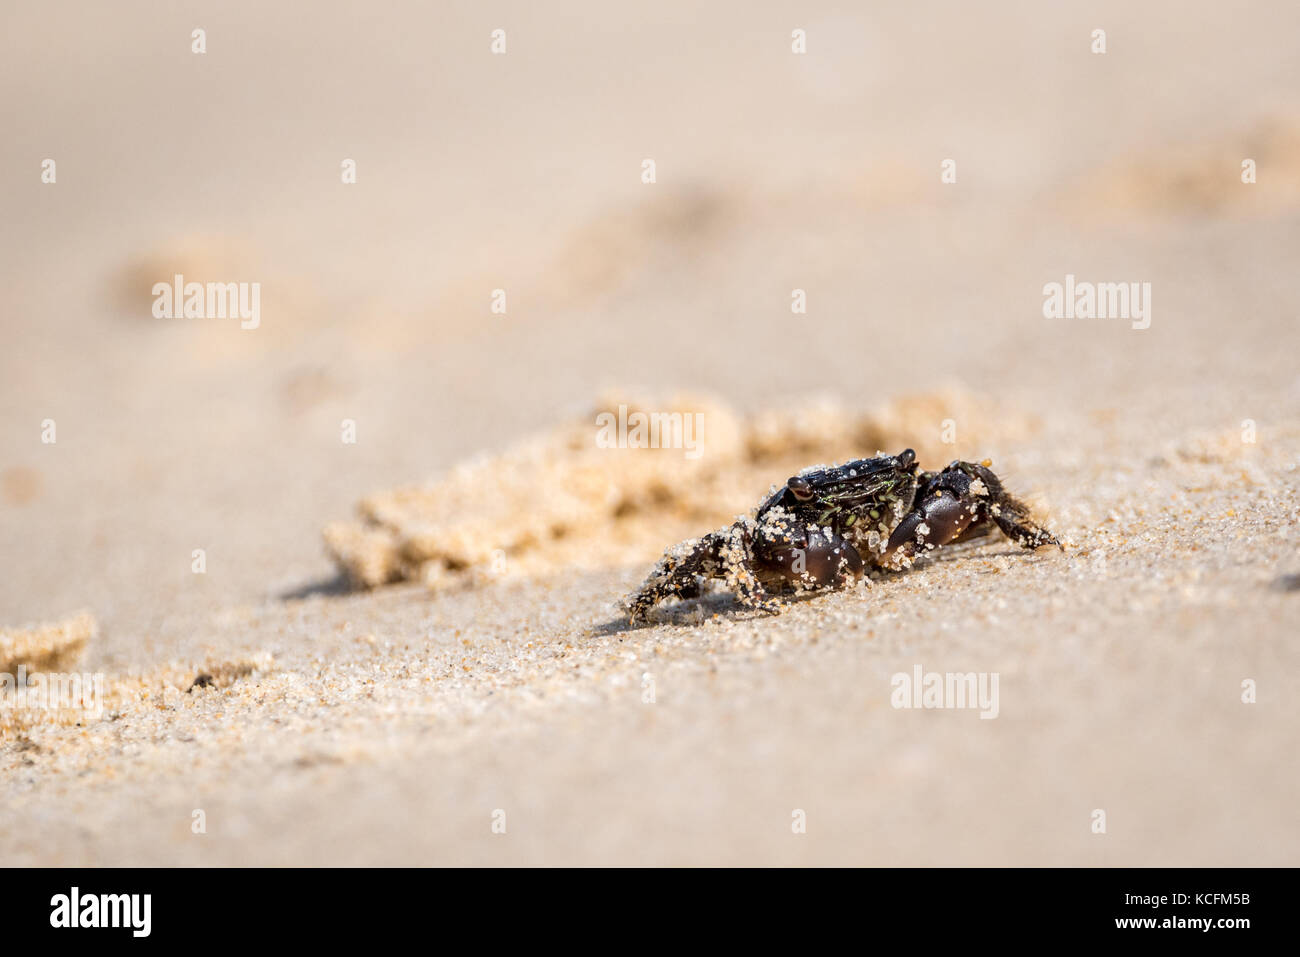 Small dark crab in the sand covered with sand grains. Photographed at a beach near Faro in Portugal. Stock Photo